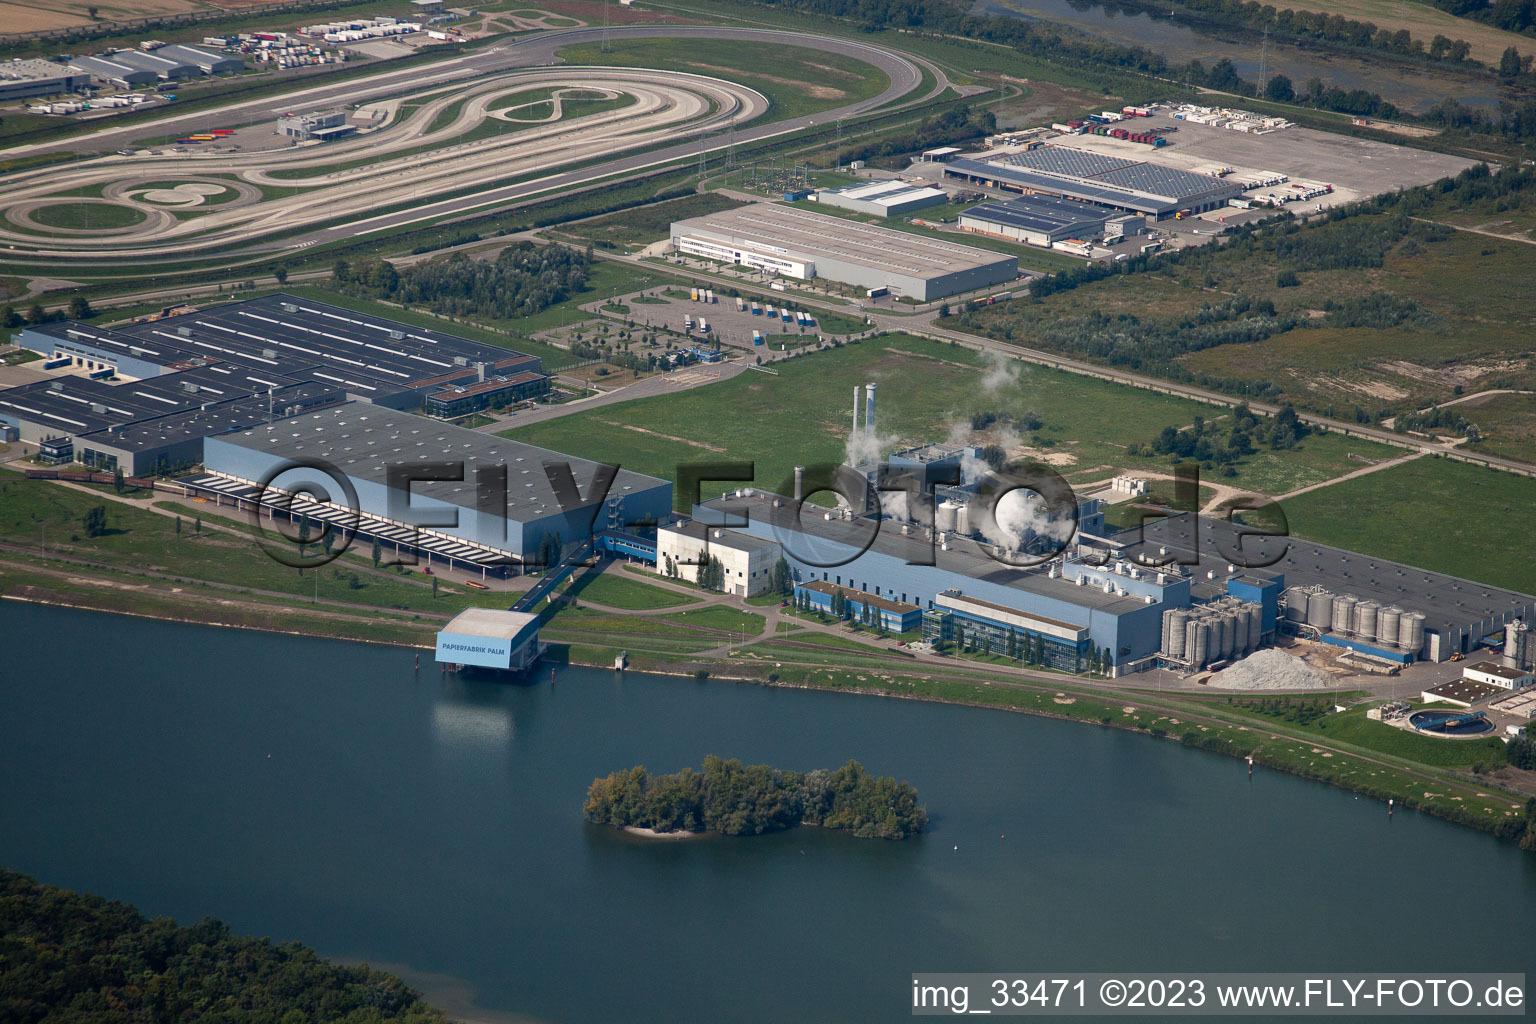 Oberwald industrial area, Palm paper factory in Wörth am Rhein in the state Rhineland-Palatinate, Germany from the plane